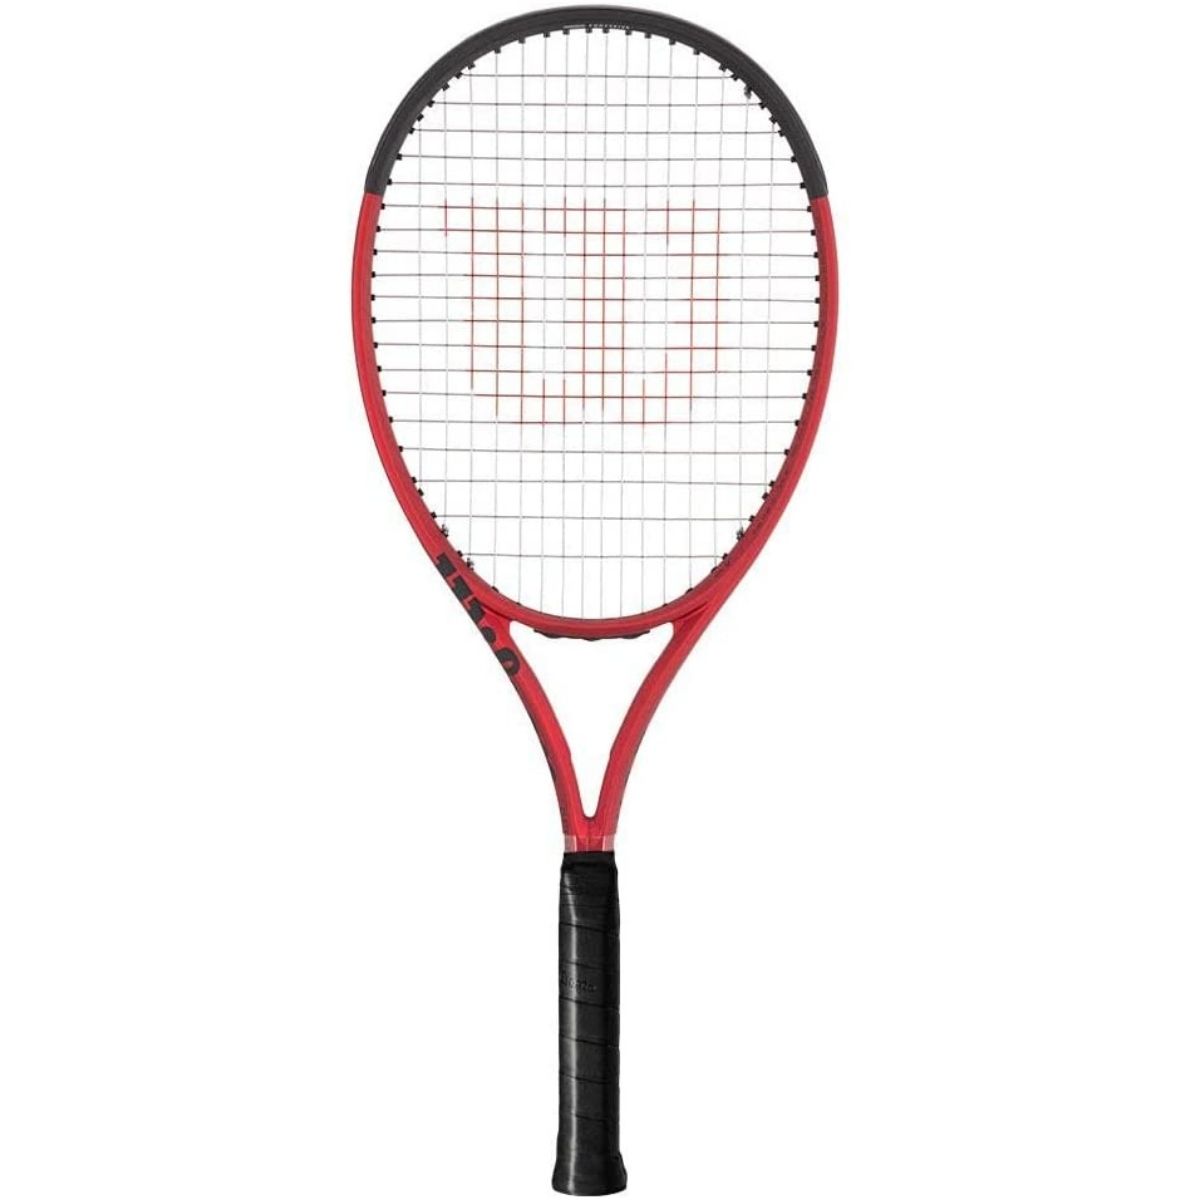 The Best Rackets for One Handed Backhand Options: Wilson Clash 108